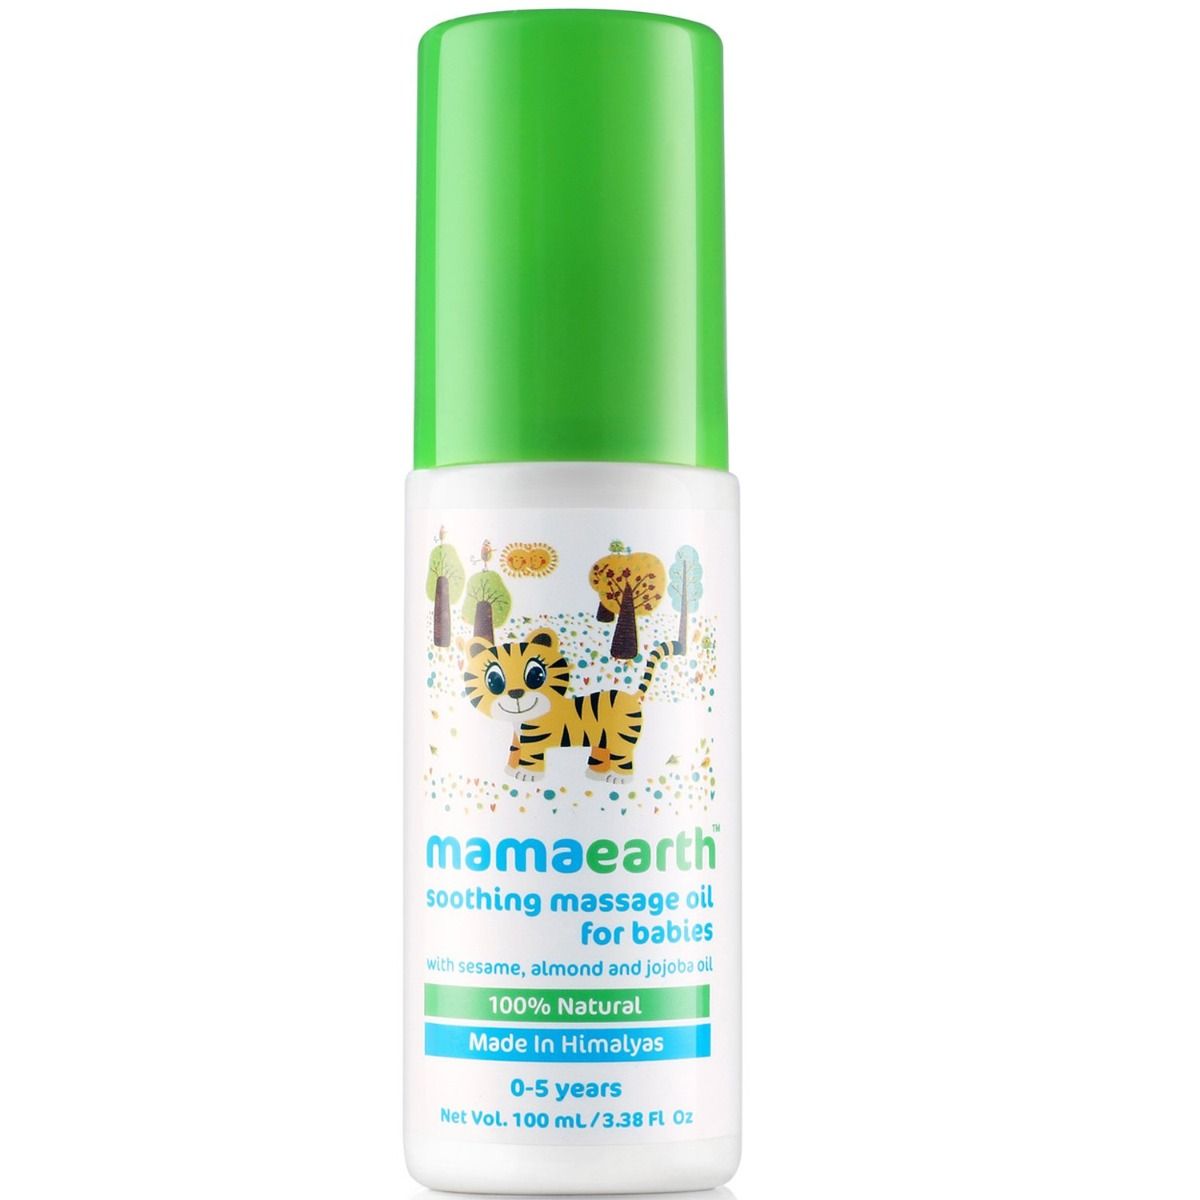 Buy Mamaearth Soothing Massage Oil For Babies with Sesame, Almond & jojoba Oil, 0 to 5 Years, 100 ml Online